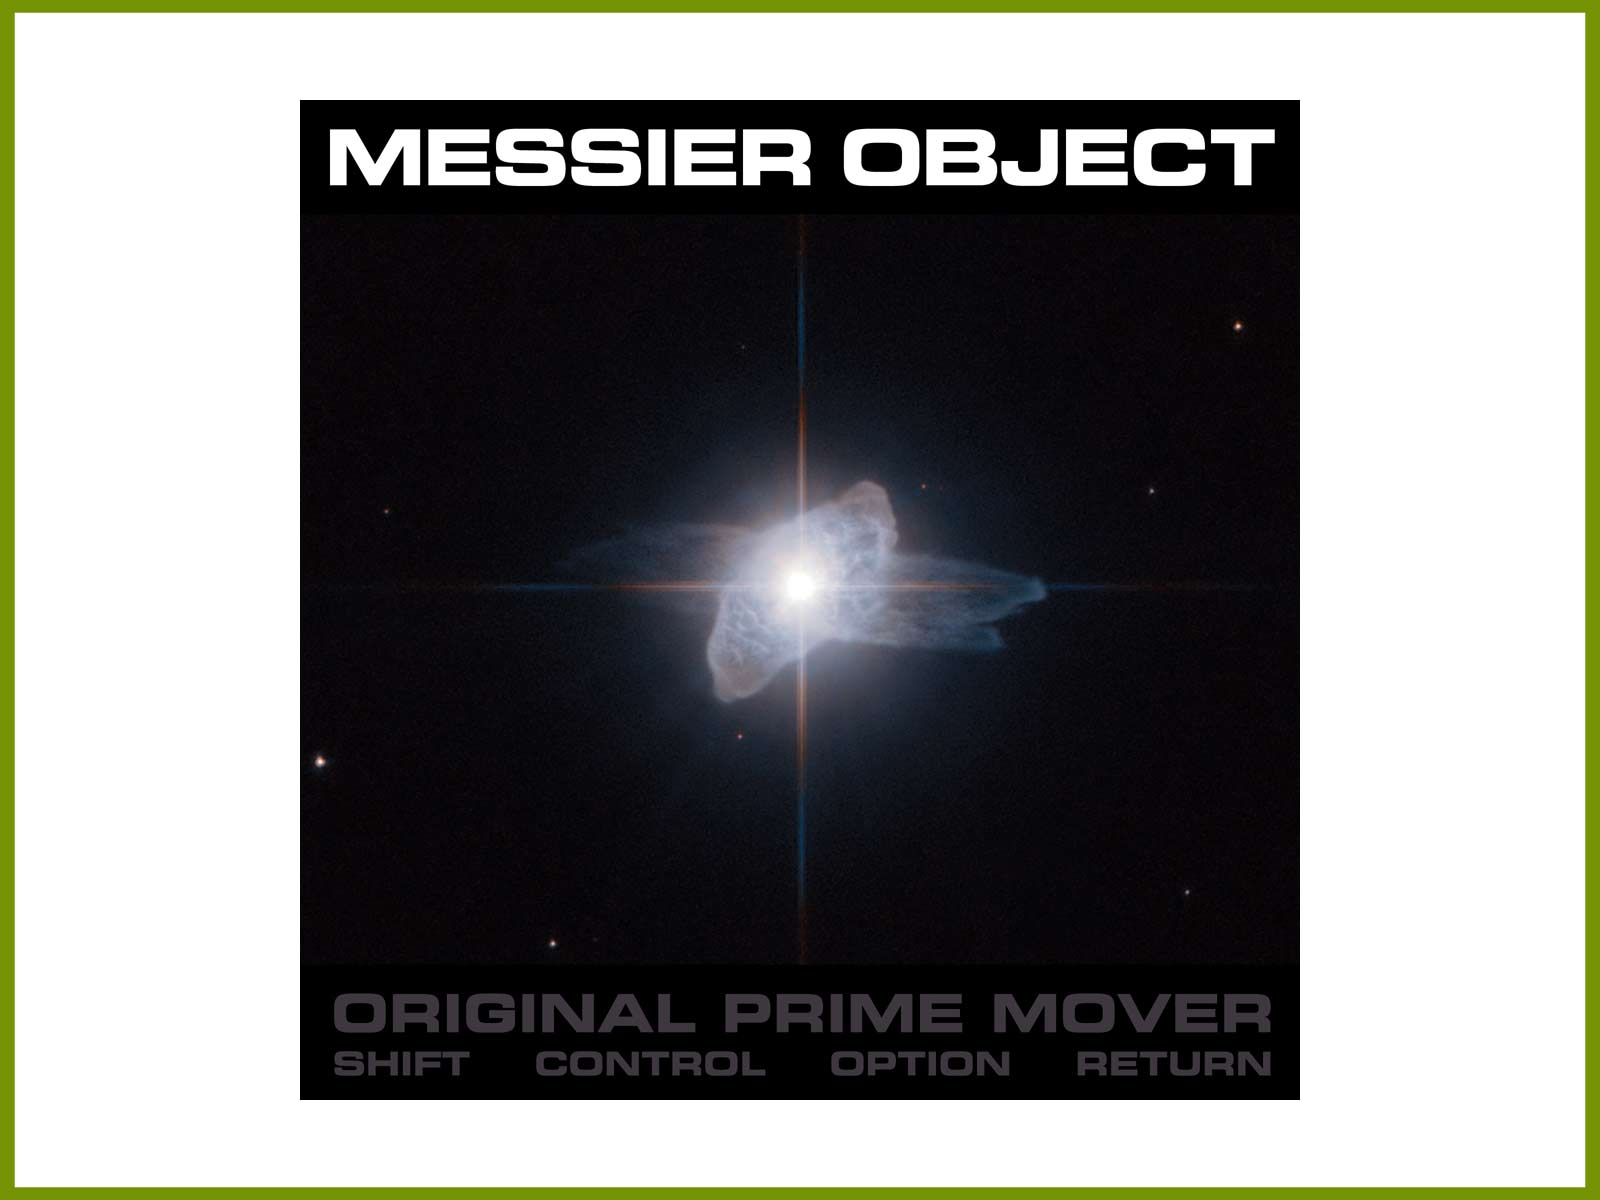 Introducing Messier Object and new space techno EP “Original Prime Mover”